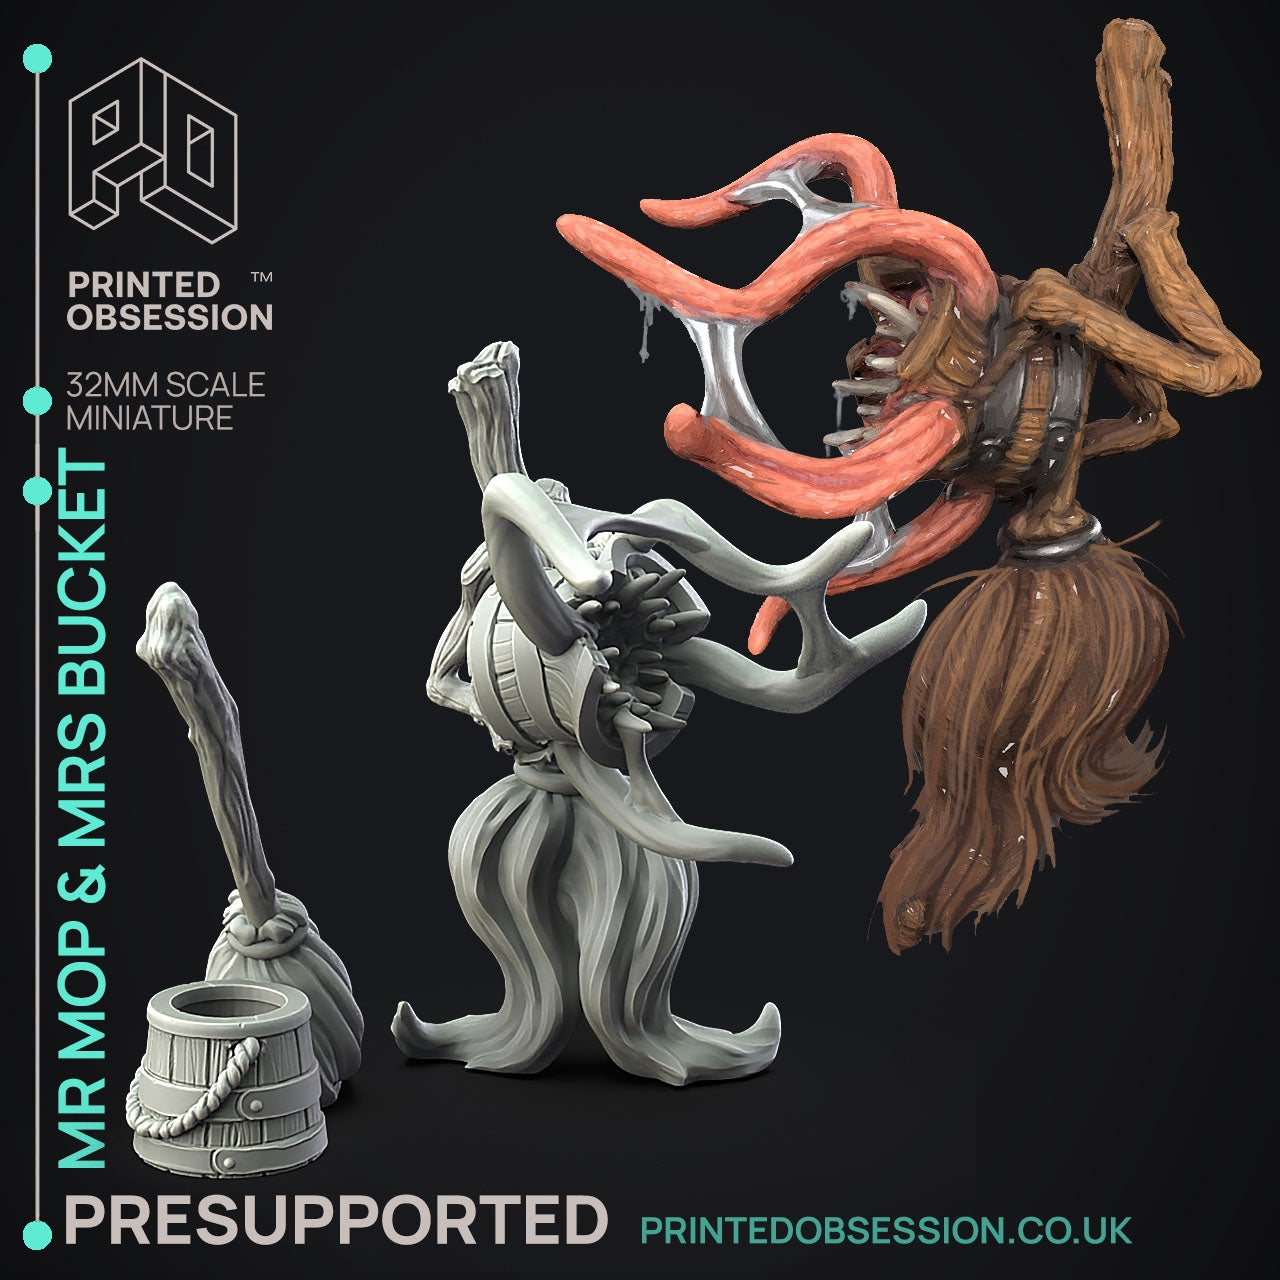 Mr Mop and Mrs Bucket Dungeon Cleaning Inc. - The Printed Obsession - Table-top mini, 3D Printed Collectable for painting and playing!